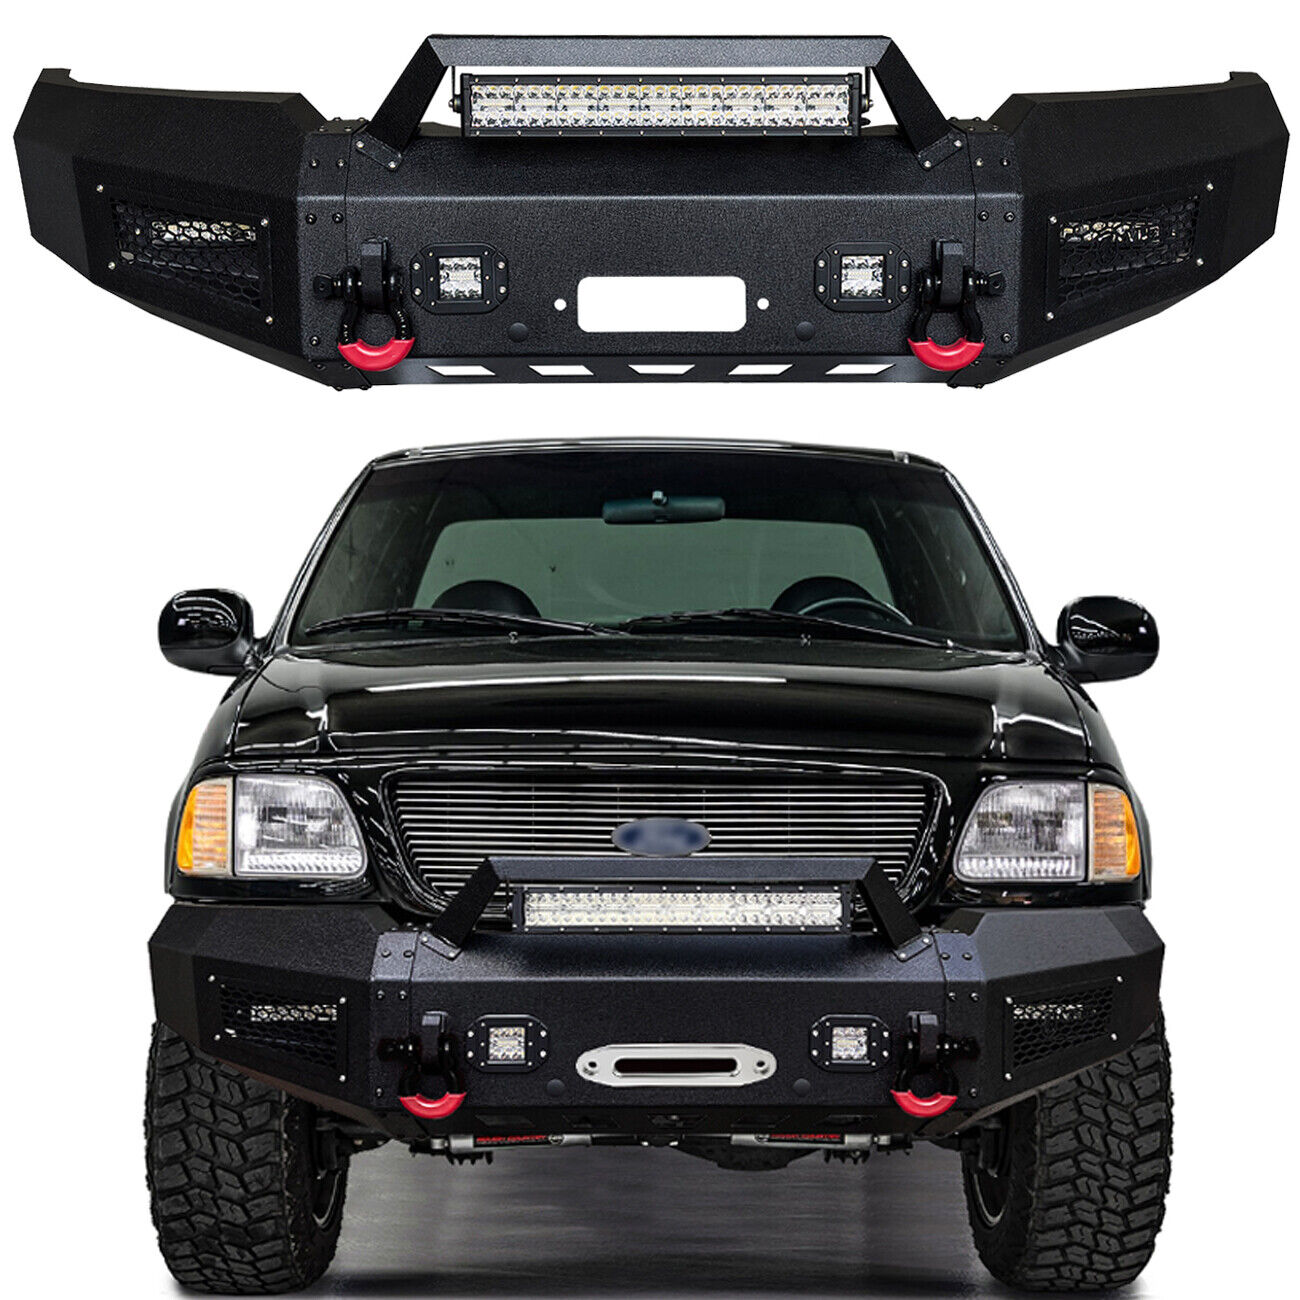 Vijay Fit for 1997-2003 Ford F150 Front or Rear Bumper With LED Light and D-ring